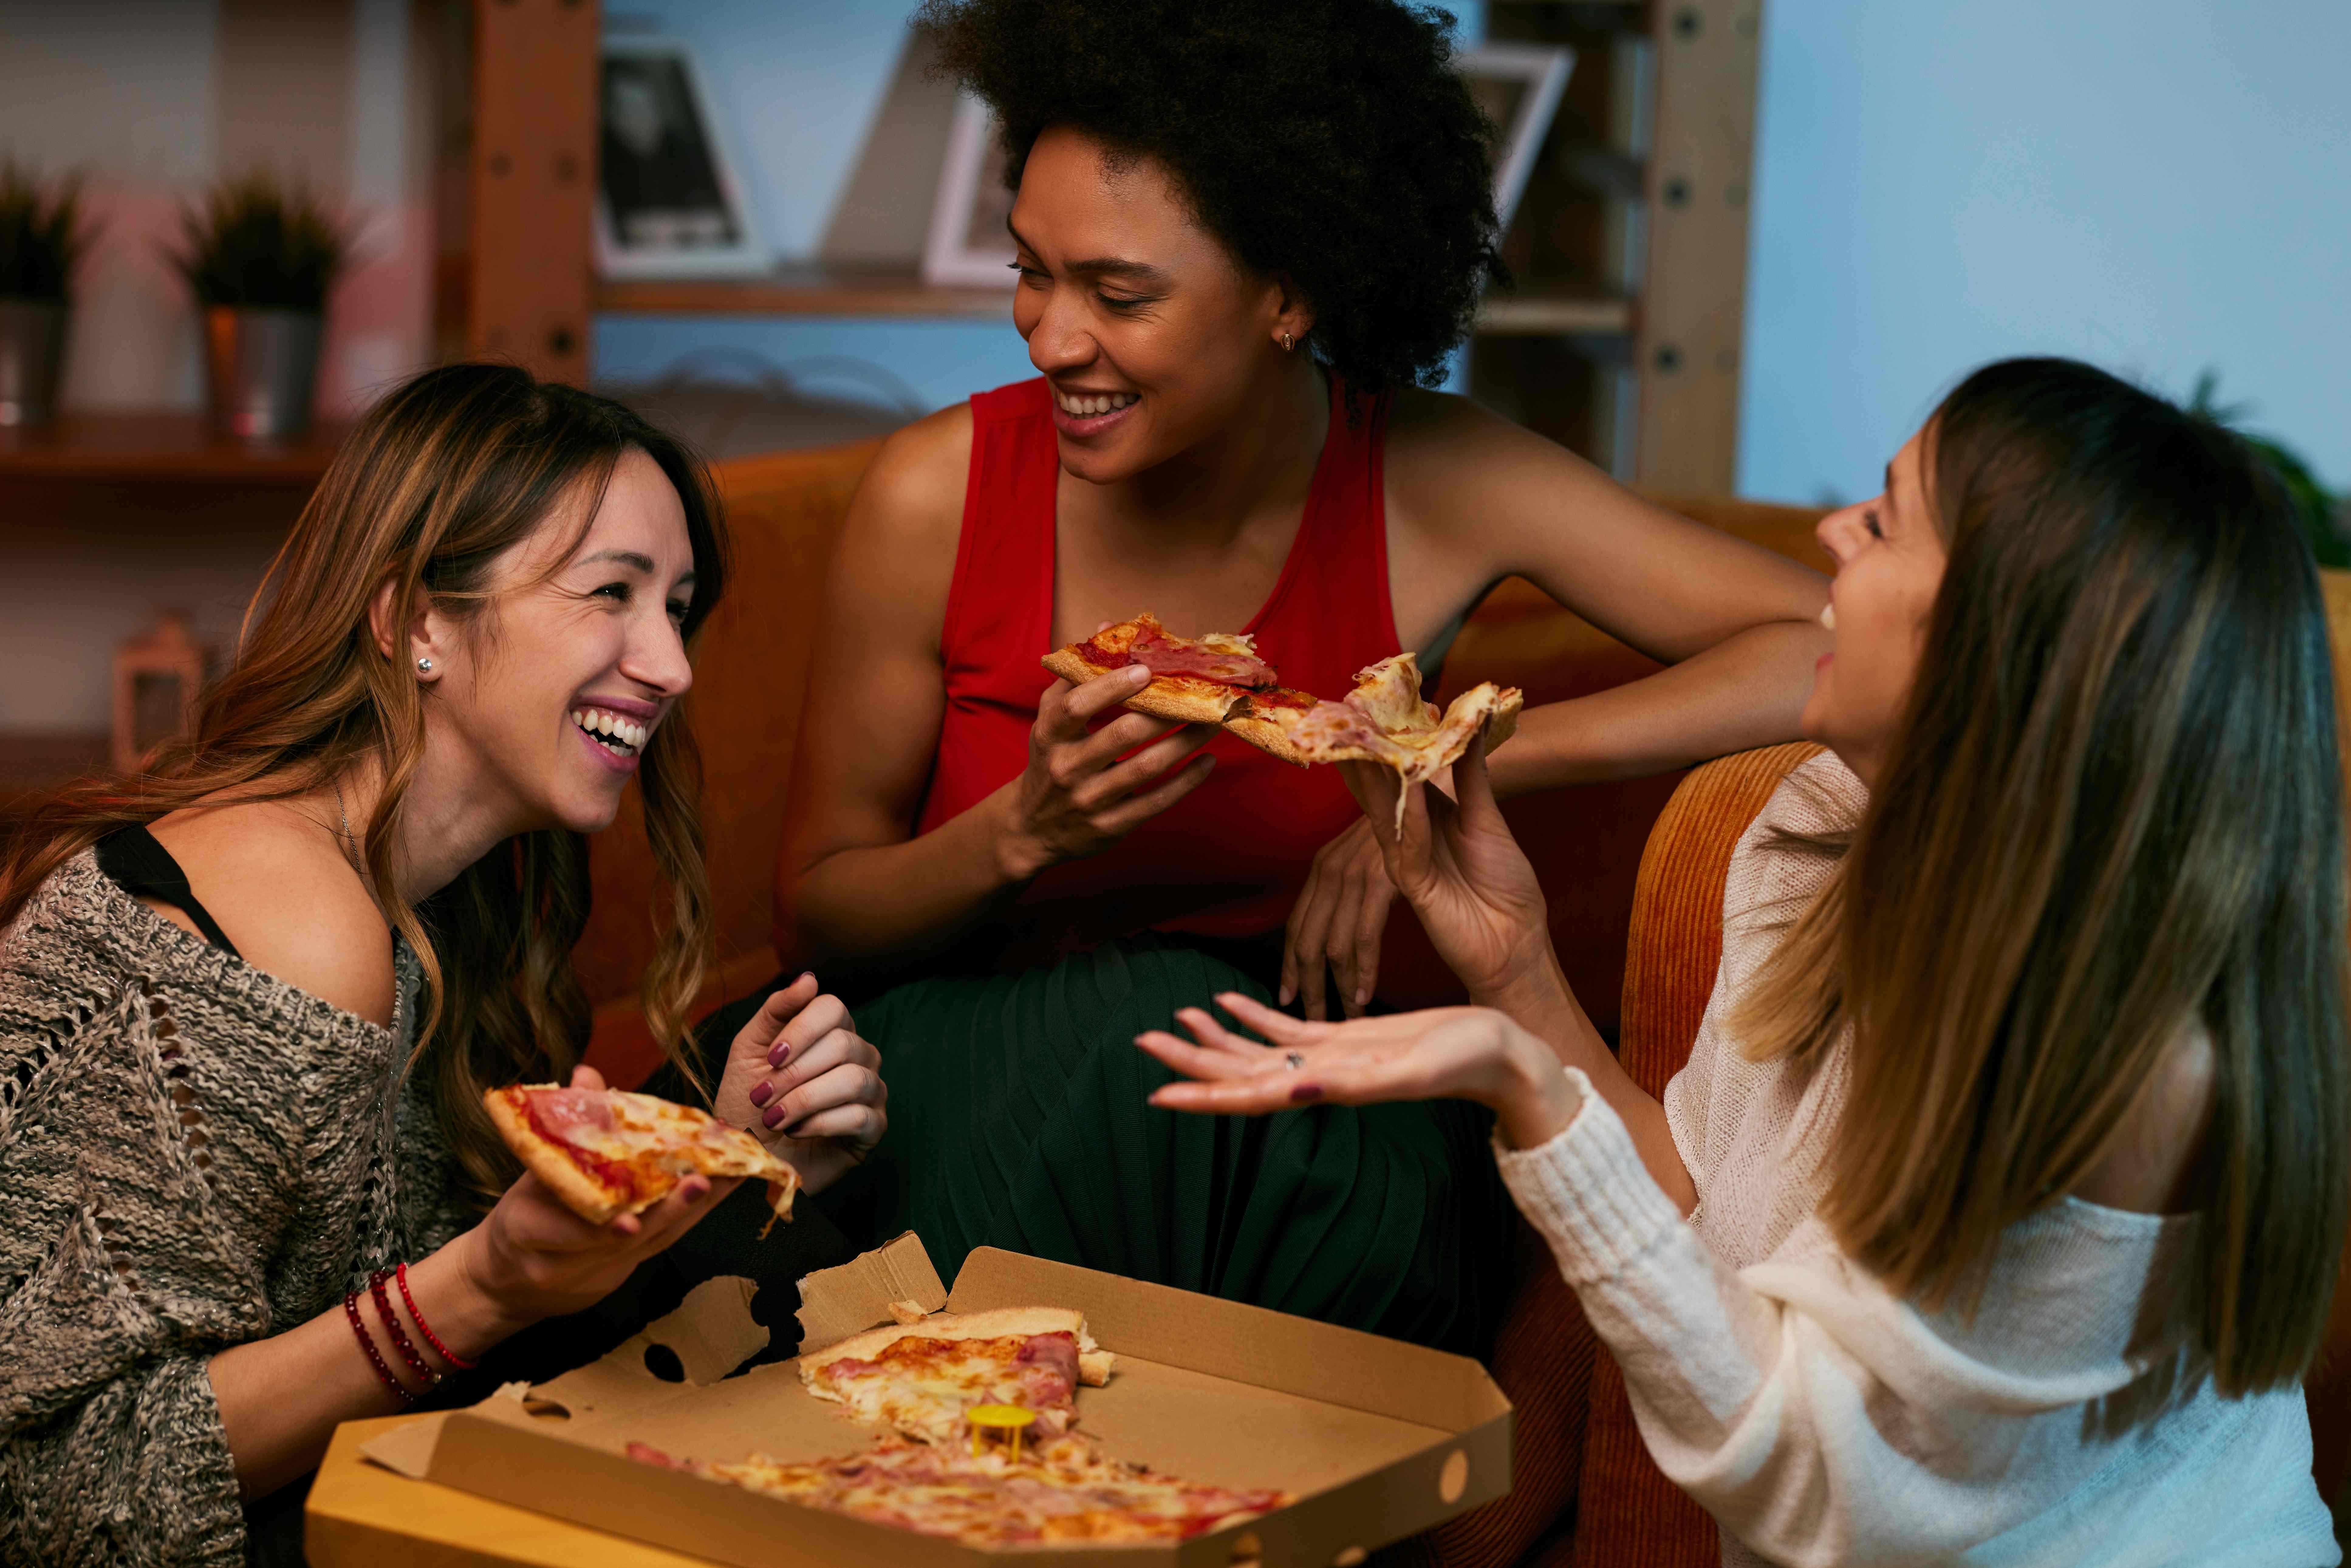 Three single friends celebrate Valentine’s Day together with pizza.